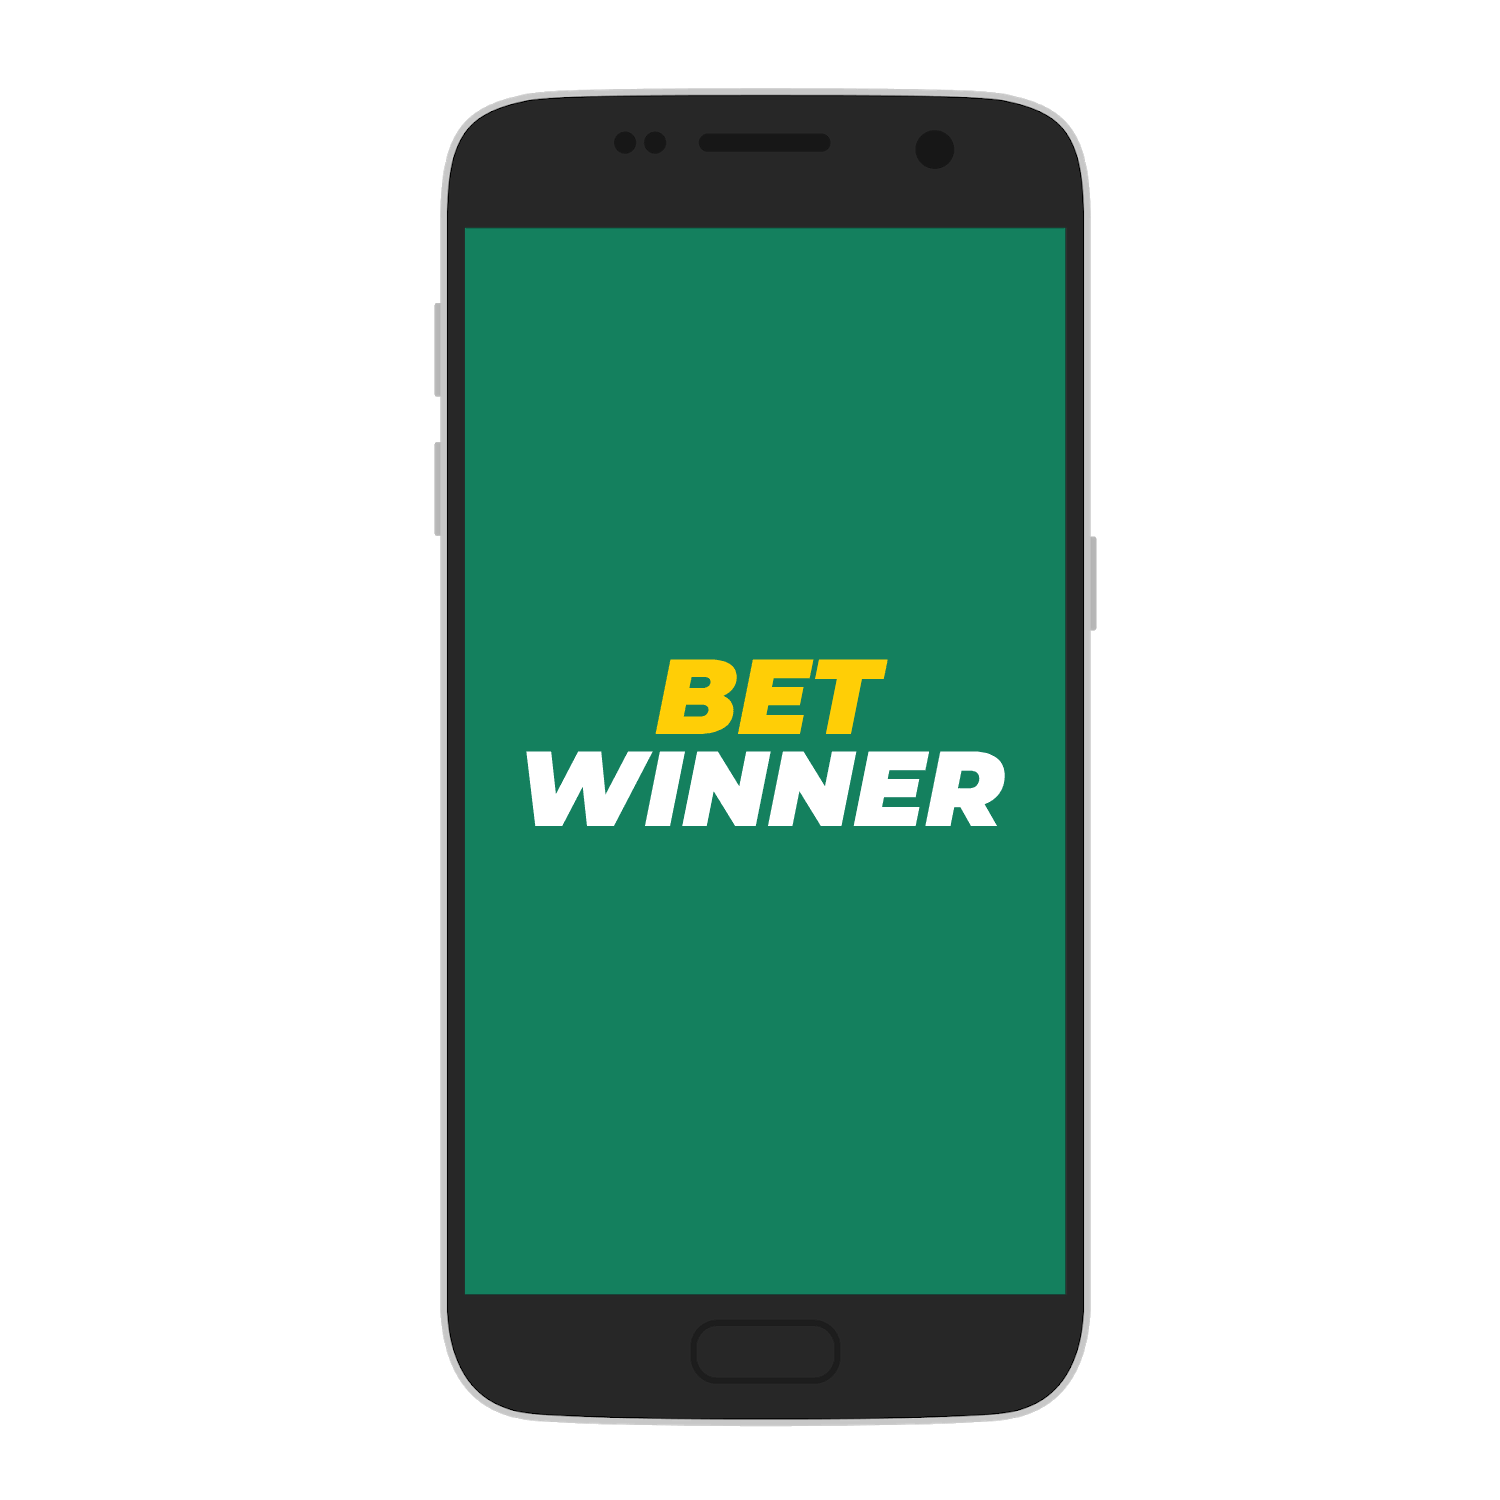 Want A Thriving Business? Focus On Betwinner Mobile!